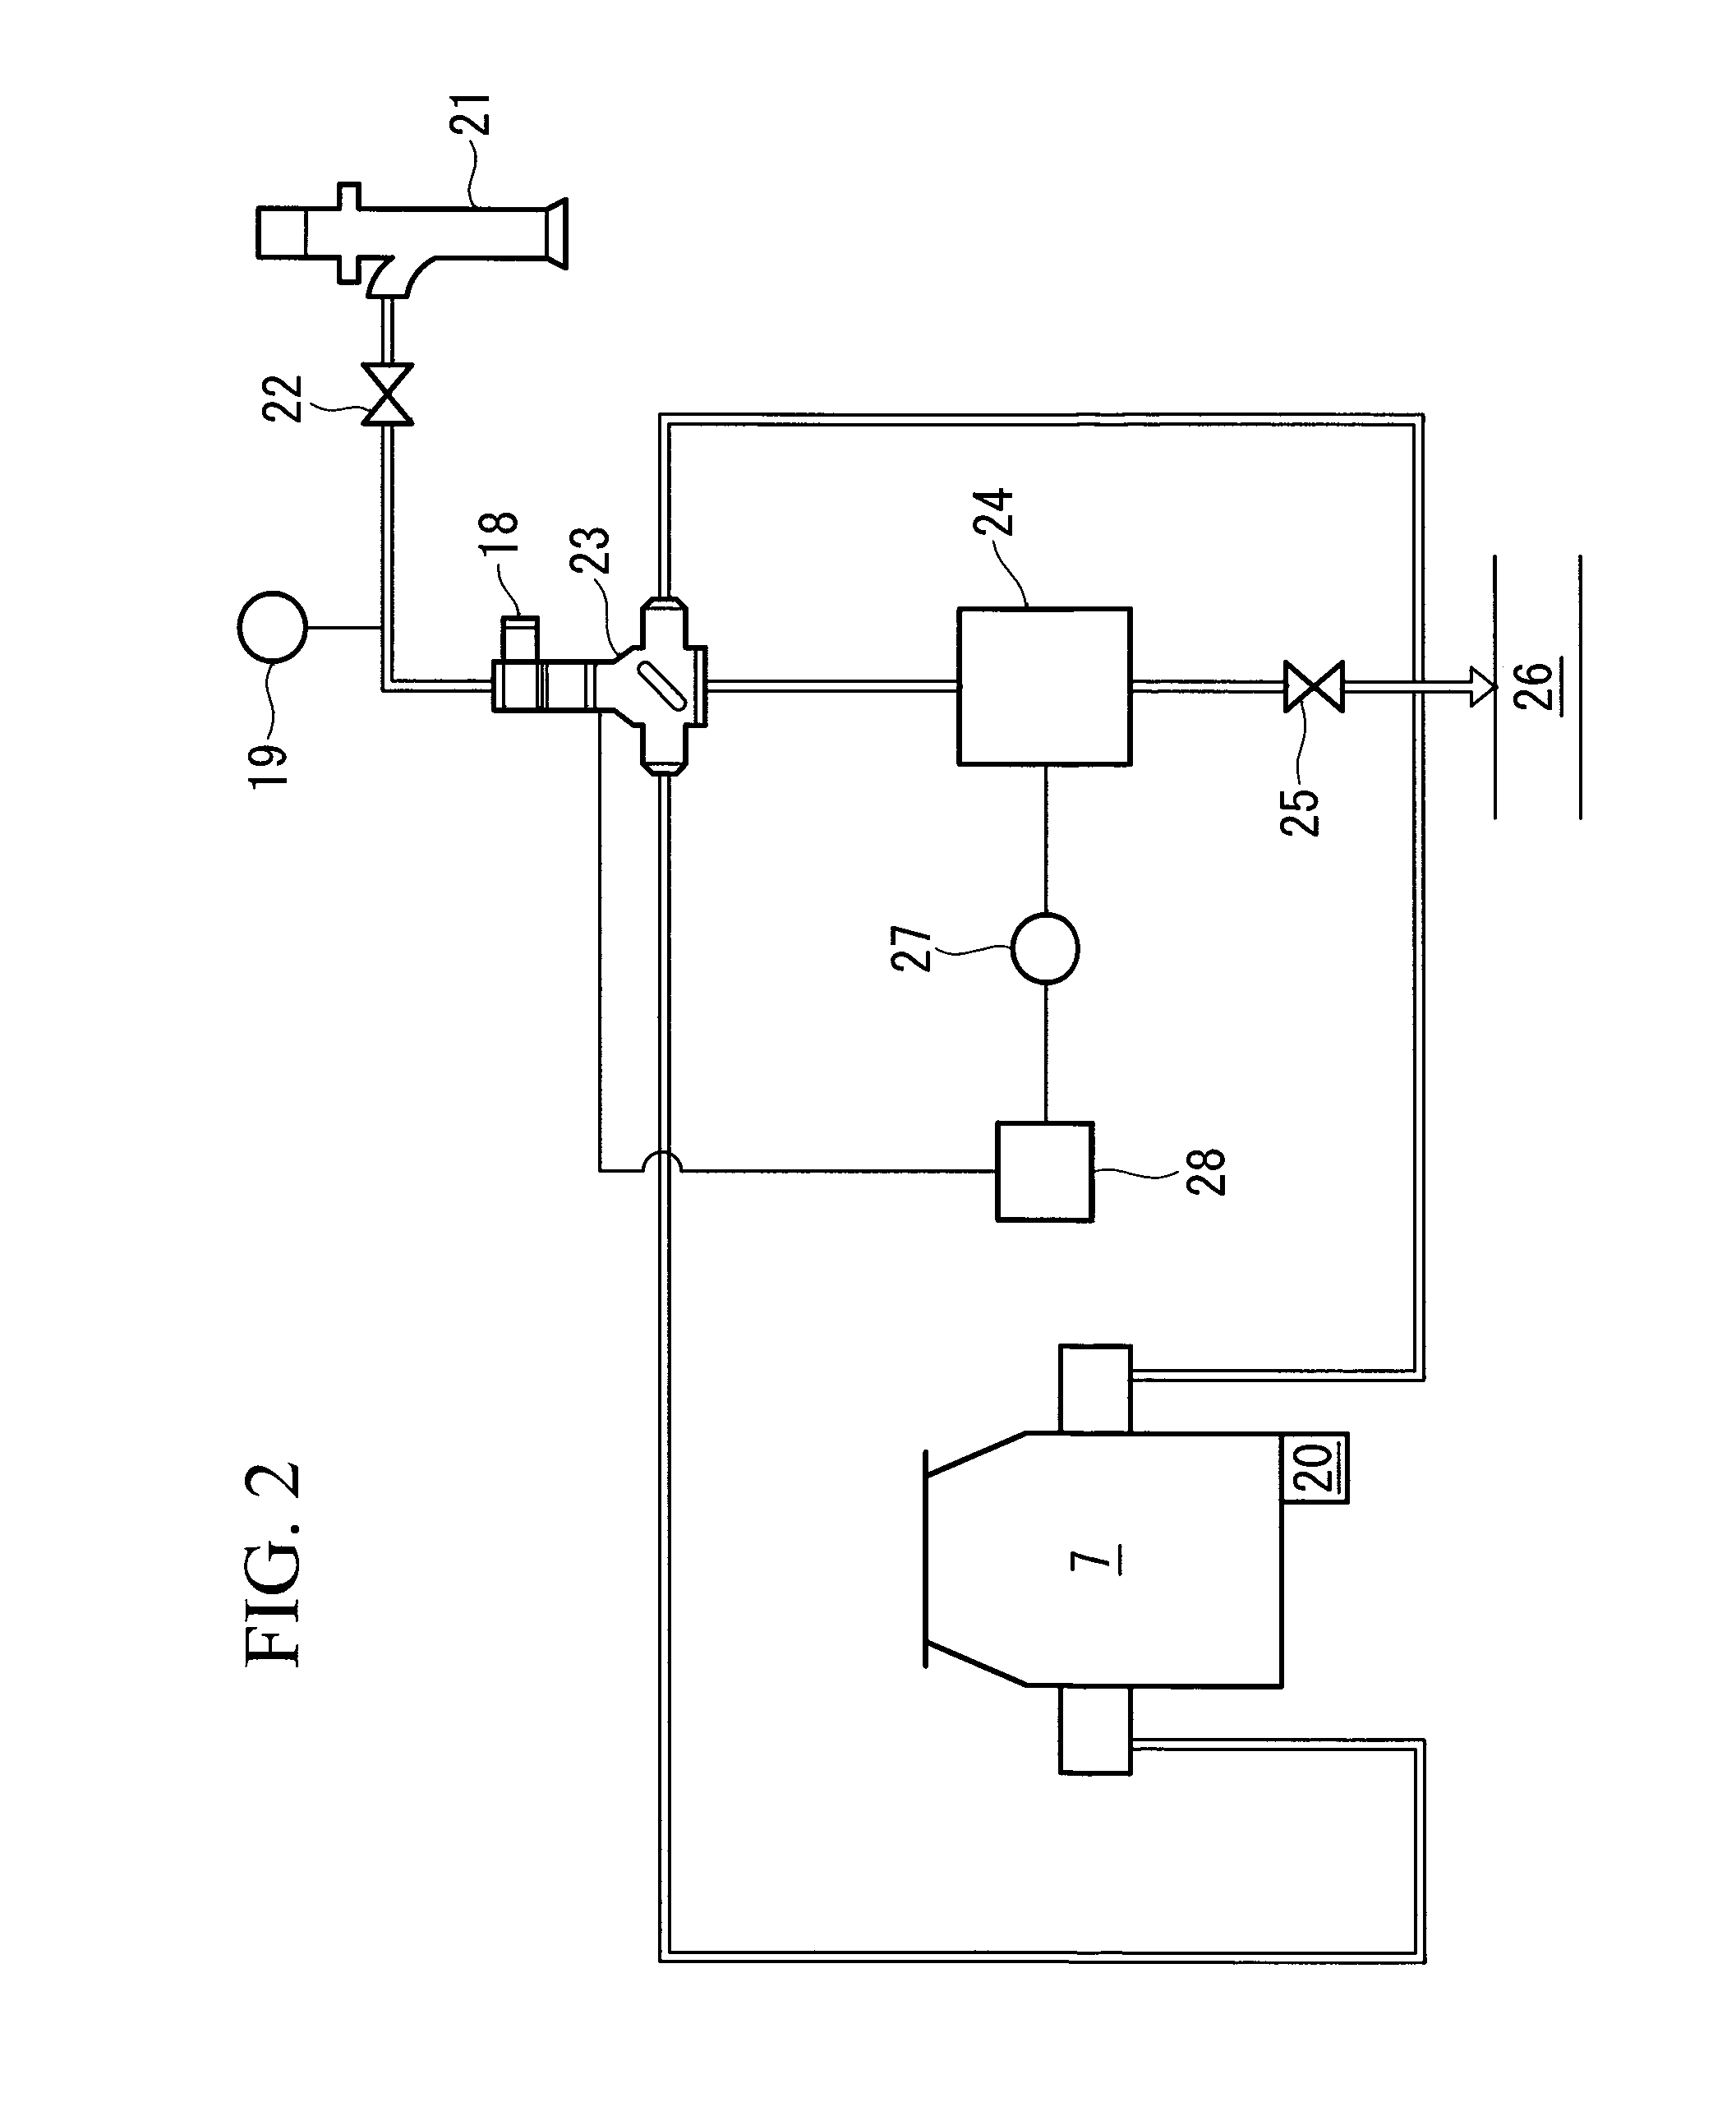 Gas turbine control system and method for single-shaft combined cycle plant